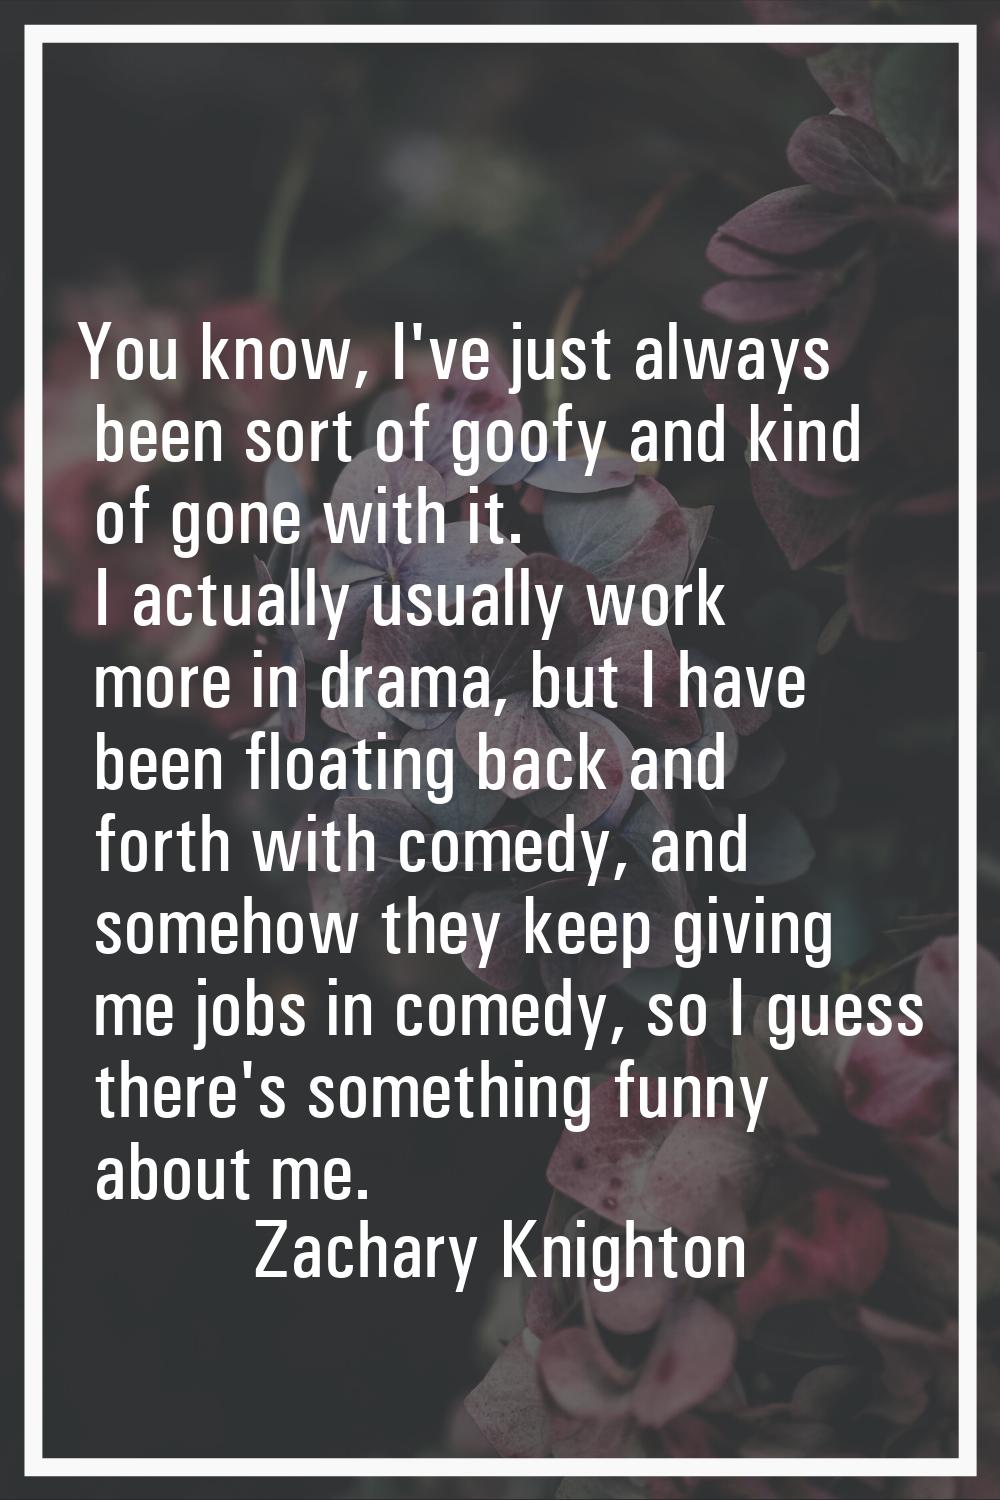 You know, I've just always been sort of goofy and kind of gone with it. I actually usually work mor